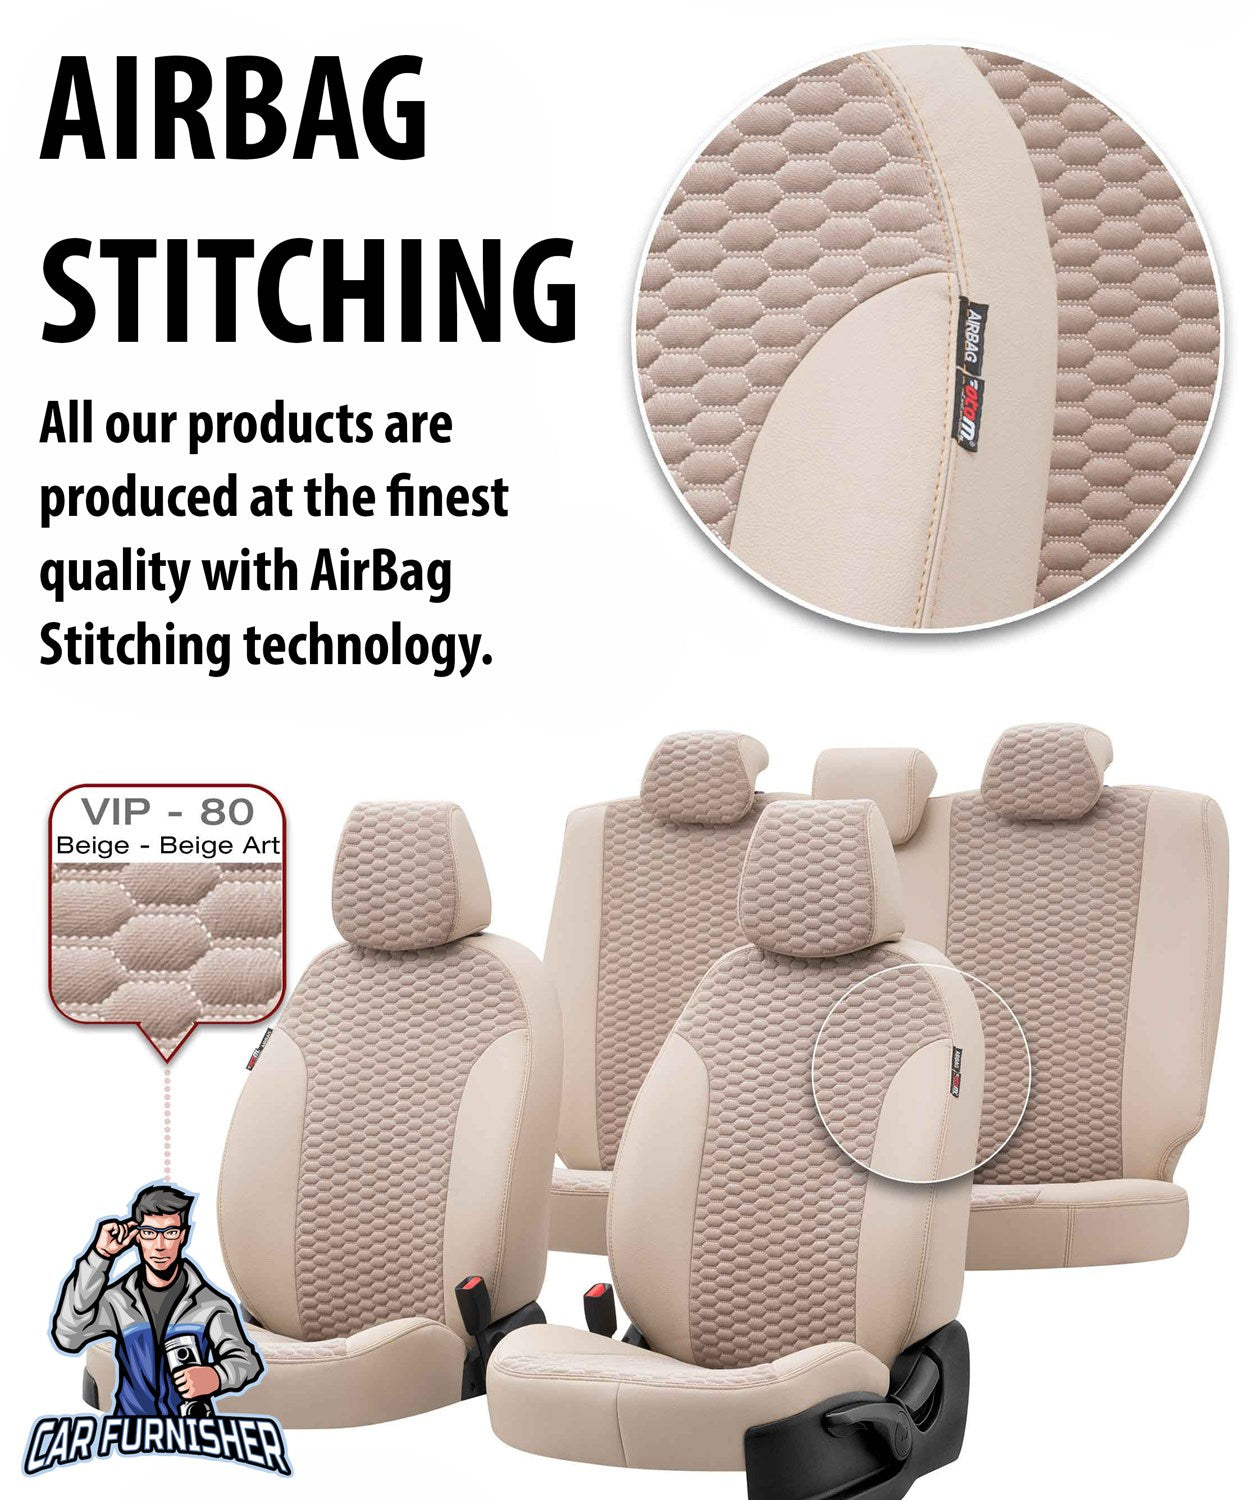 Audi Q5 Car Seat Cover 2008-2016 Tokyo Foal Feather Beige Full Set (5 Seats + Handrest) Leather & Foal Feather